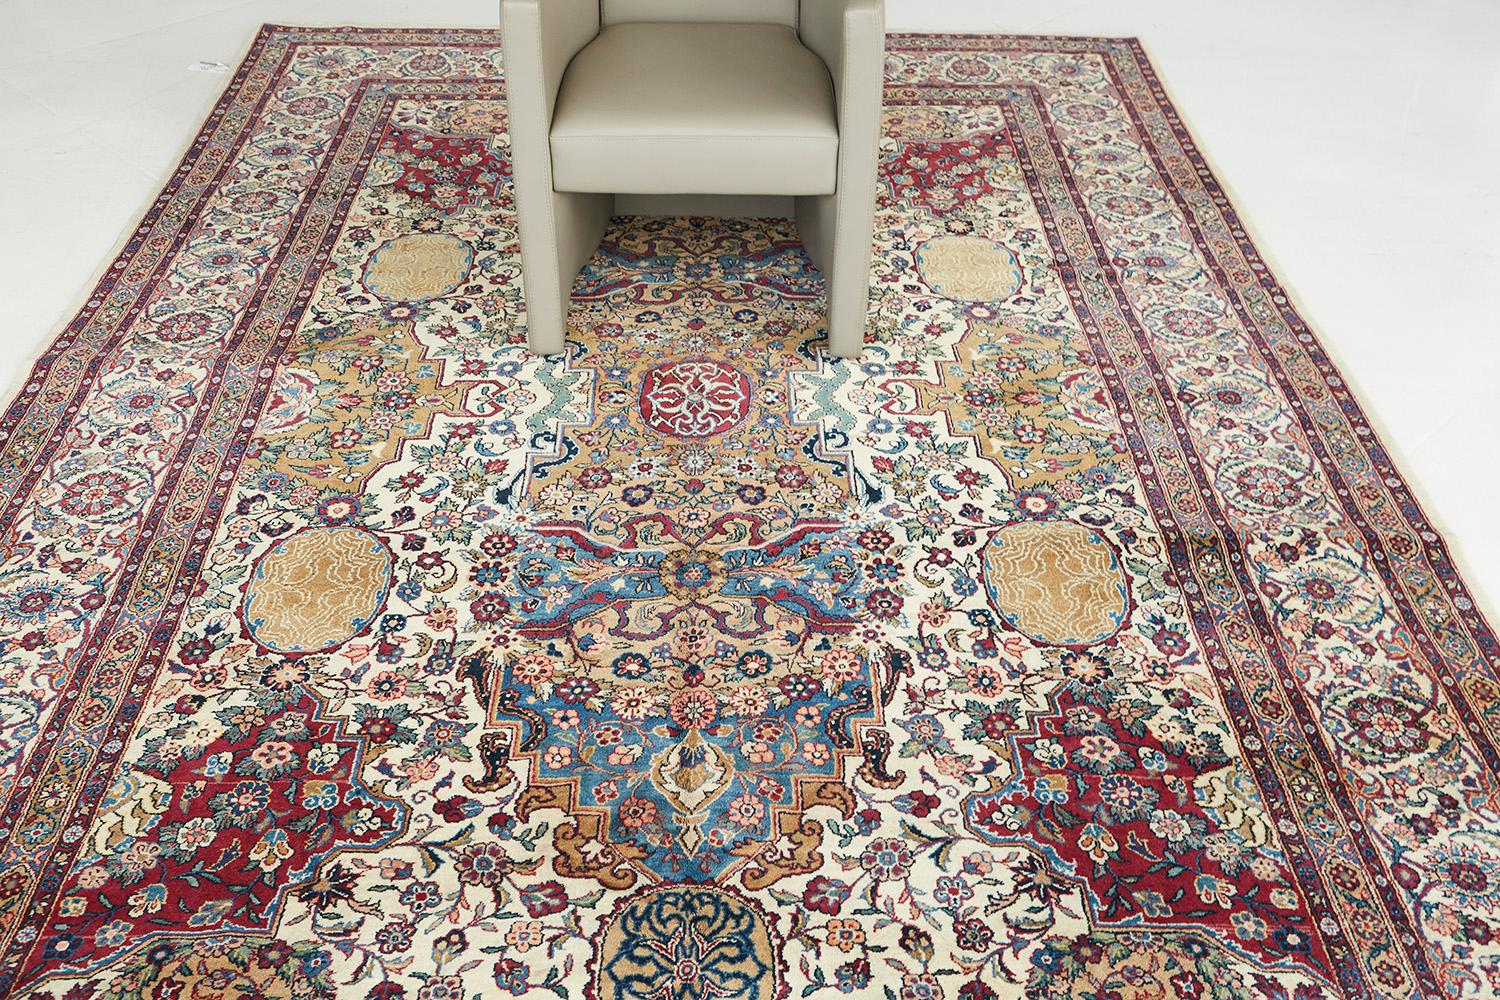 A grand and stunning piece indeed, this rug features a marvelous floral pattern along with large intricate motifs in the center. The border continues with the captivating pattern featuring a repeating pattern of large floral motifs.

Rug number